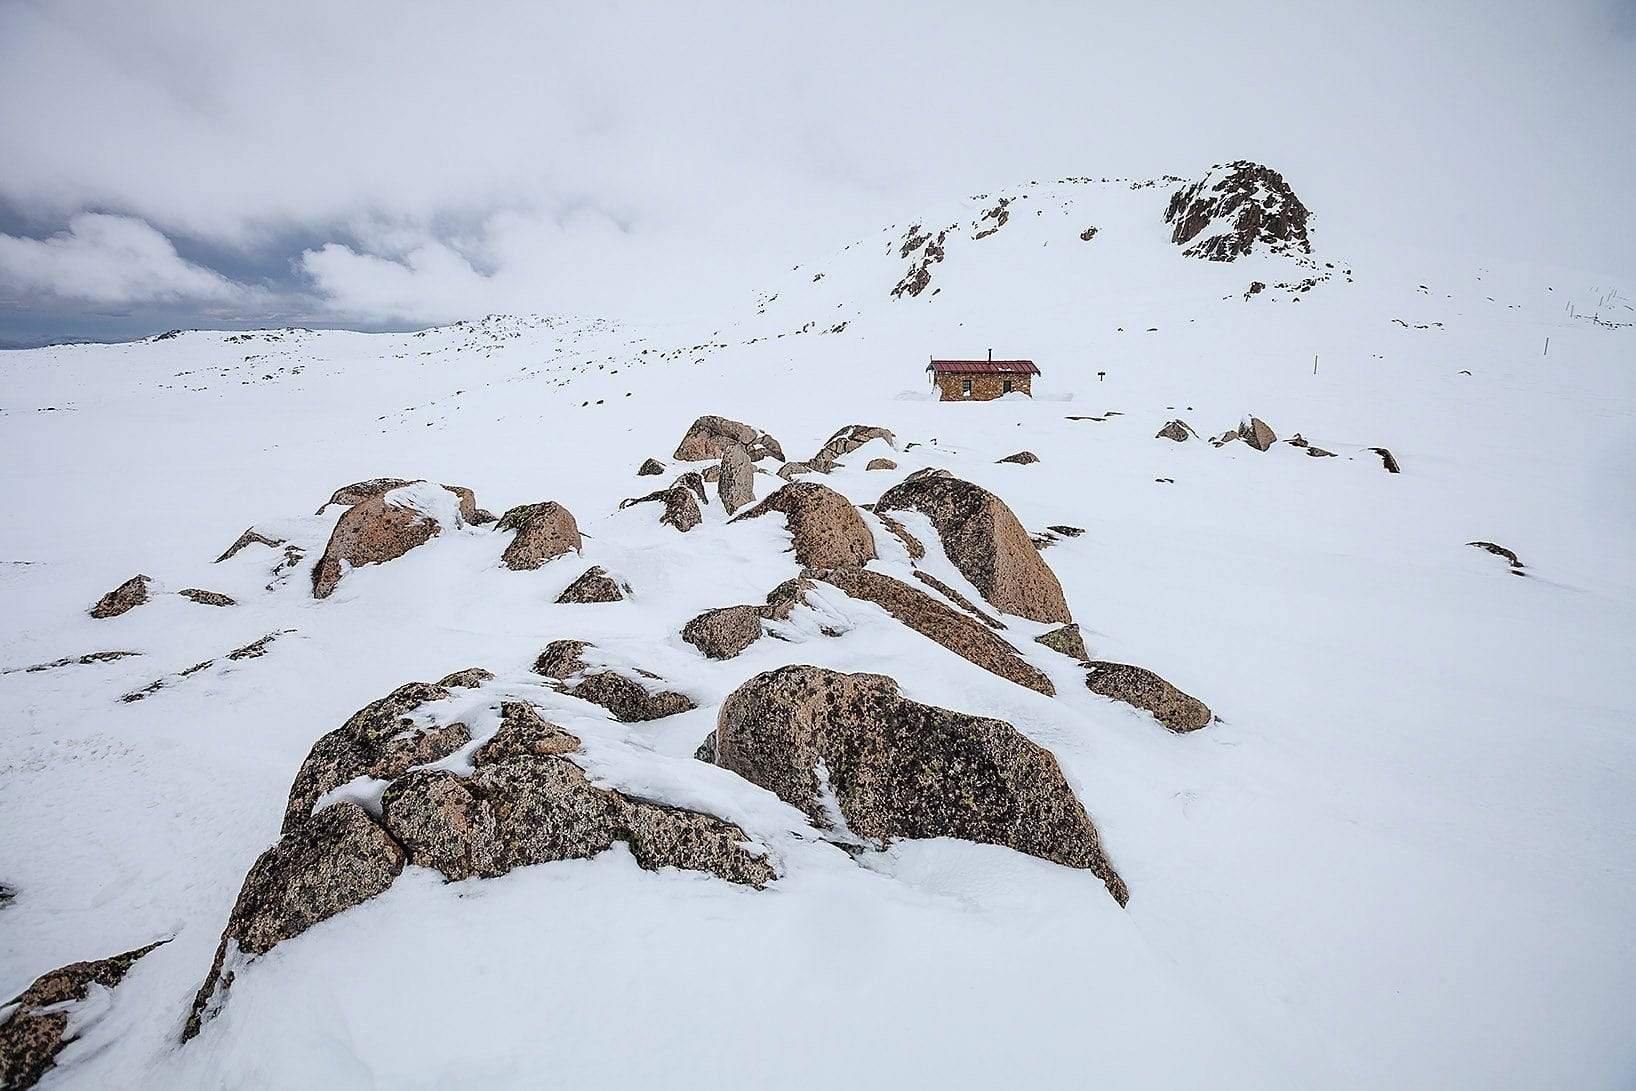 Penetrating stones under snow, Snow Refuge - Snowy Mountains NSW